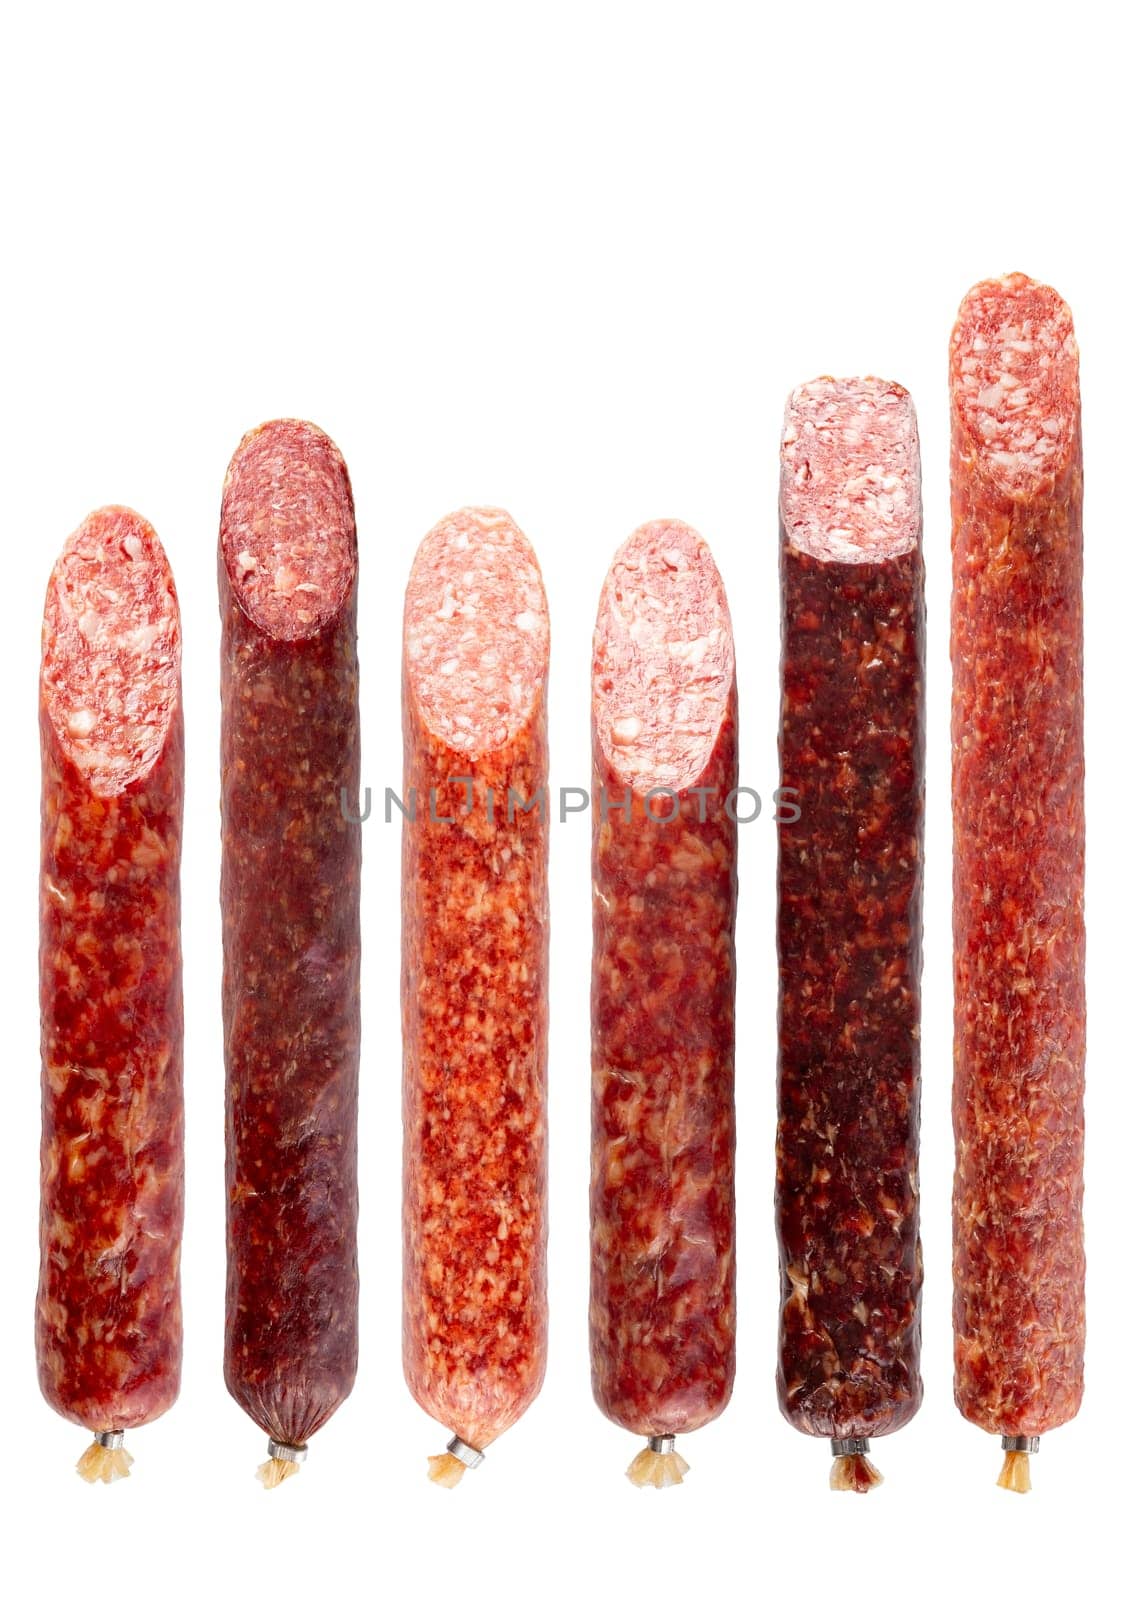 Set of smoked and cured different sausages with cut tips isolated on white background.